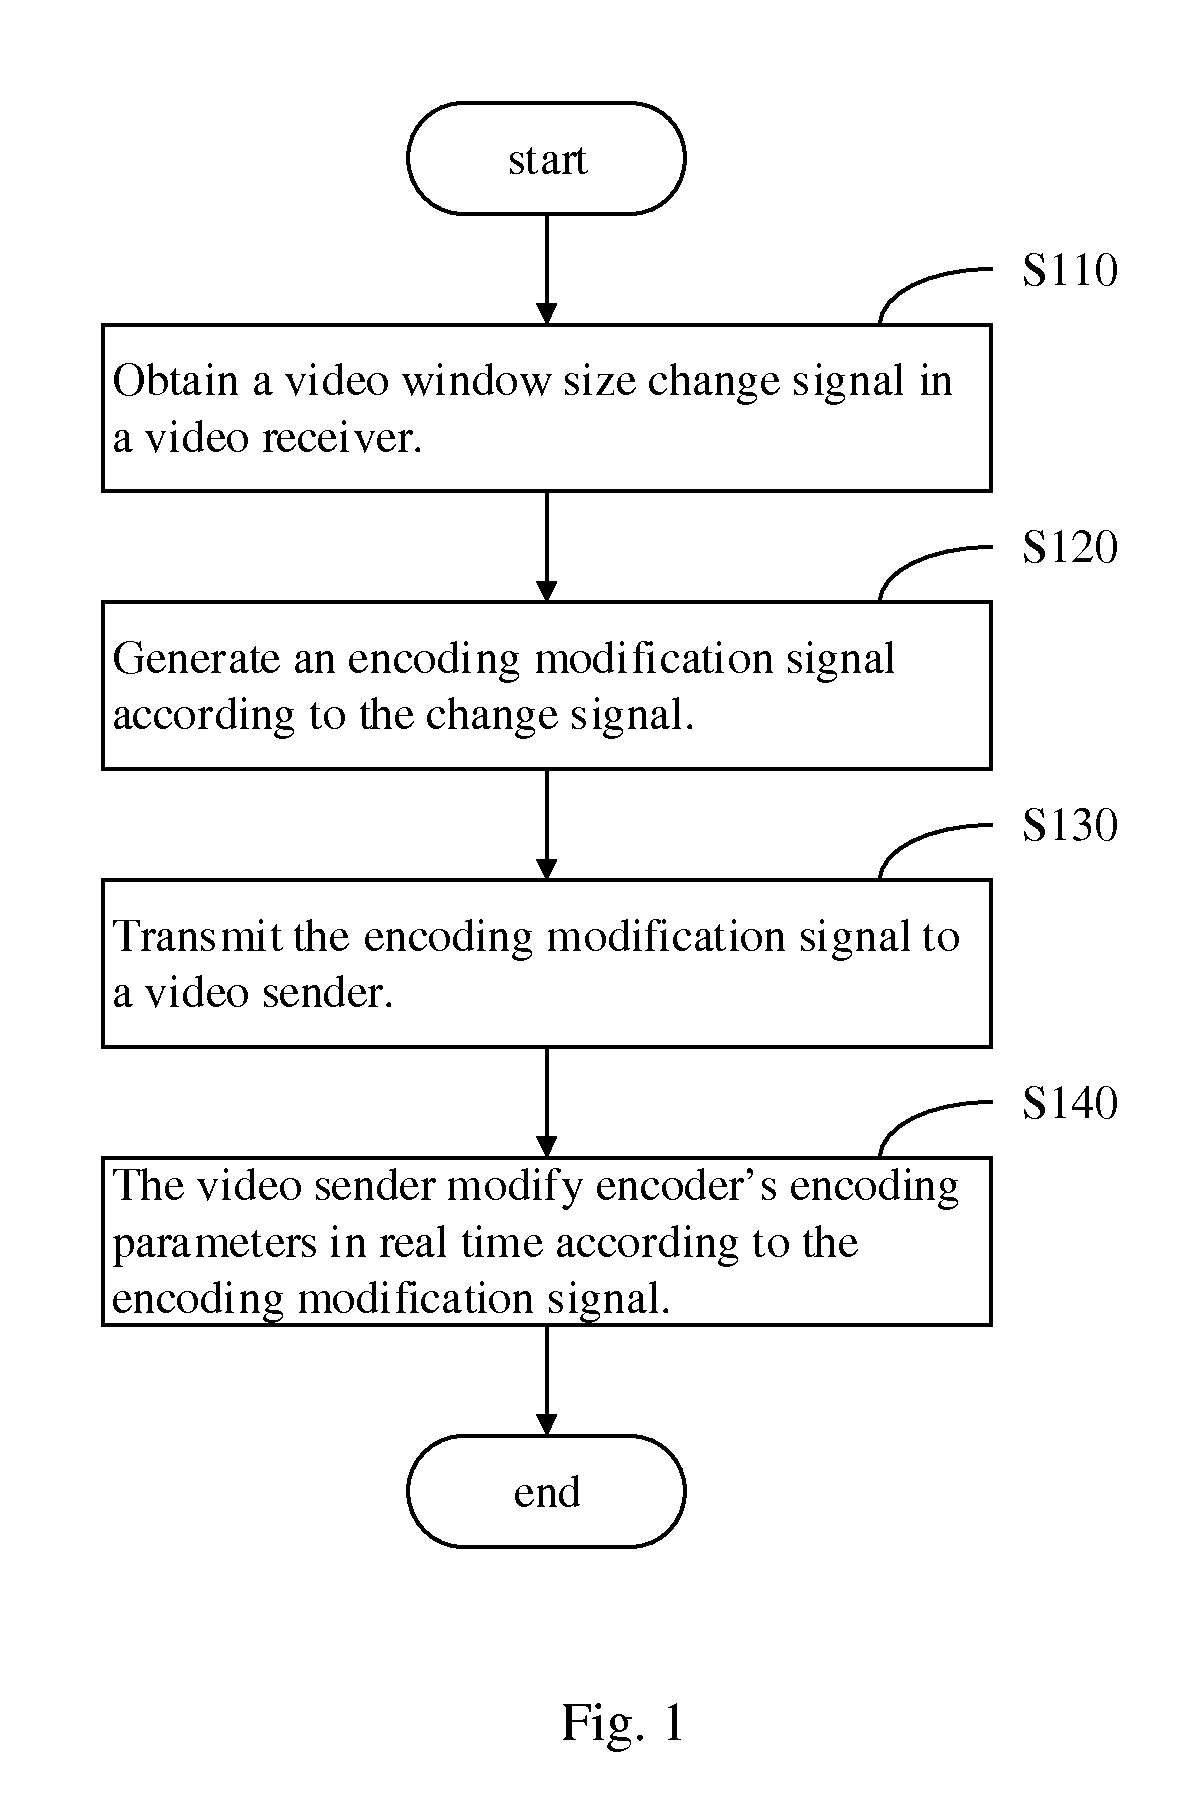 Video communication method and system for dynamically modifying video encoding